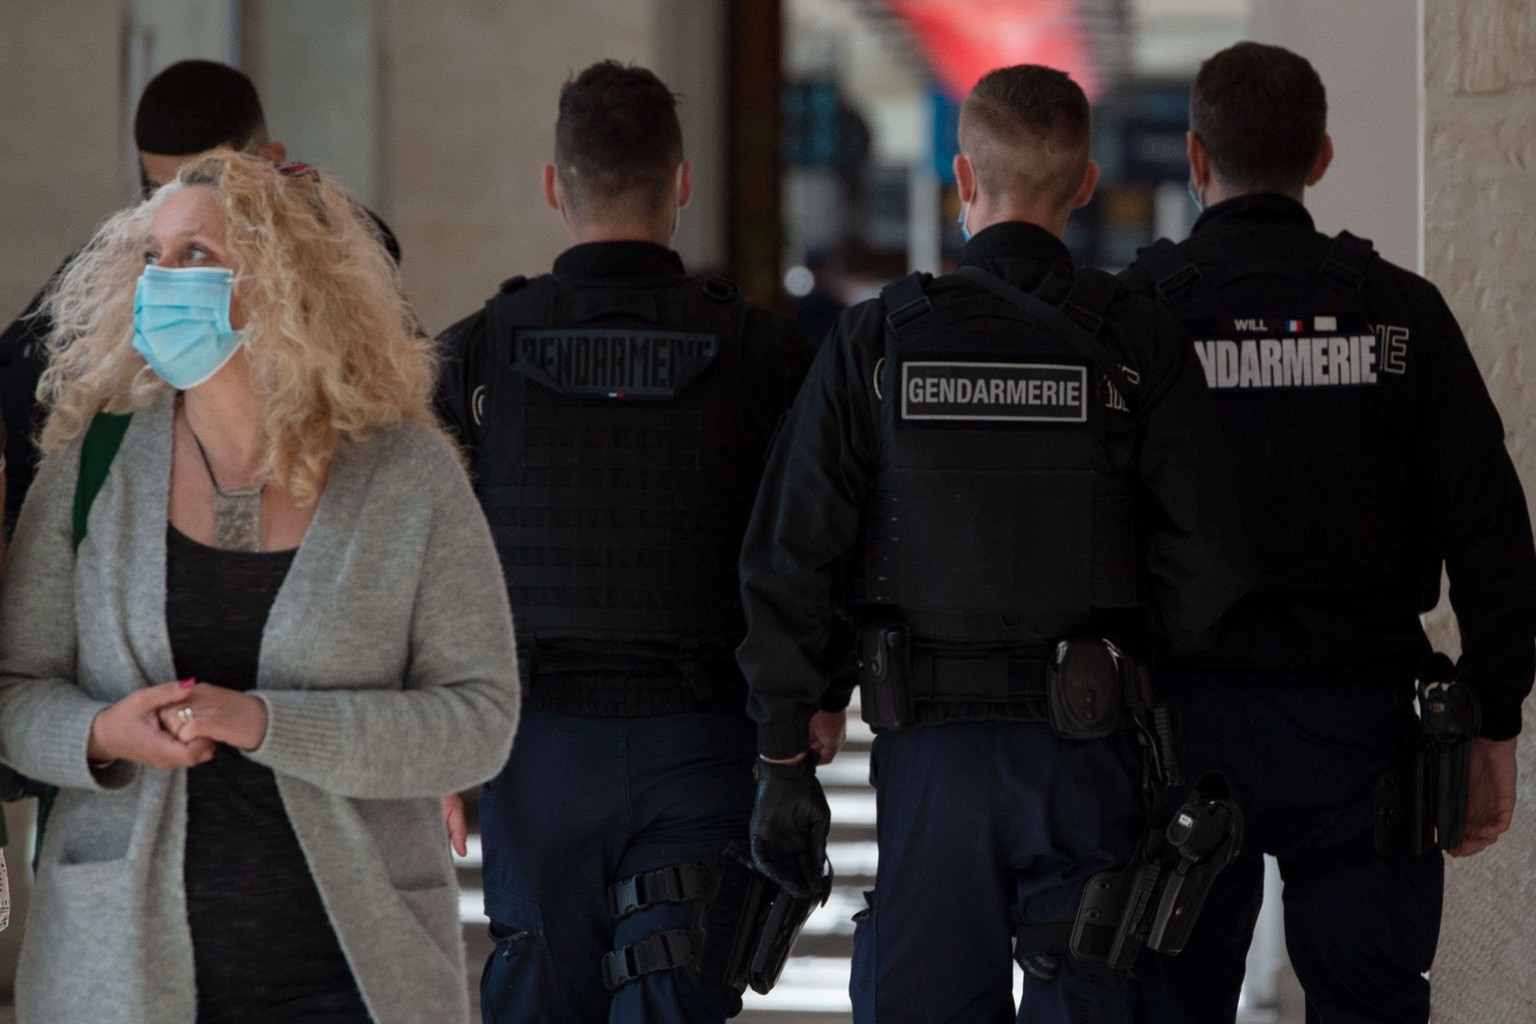 epa09101051 Traveler wearing a face mask and policemen walk on the platform of Saint-Jean train station in Bordeaux, France, 27 March 2021. French Prime Minister Castex on March 18 announced additiona ...